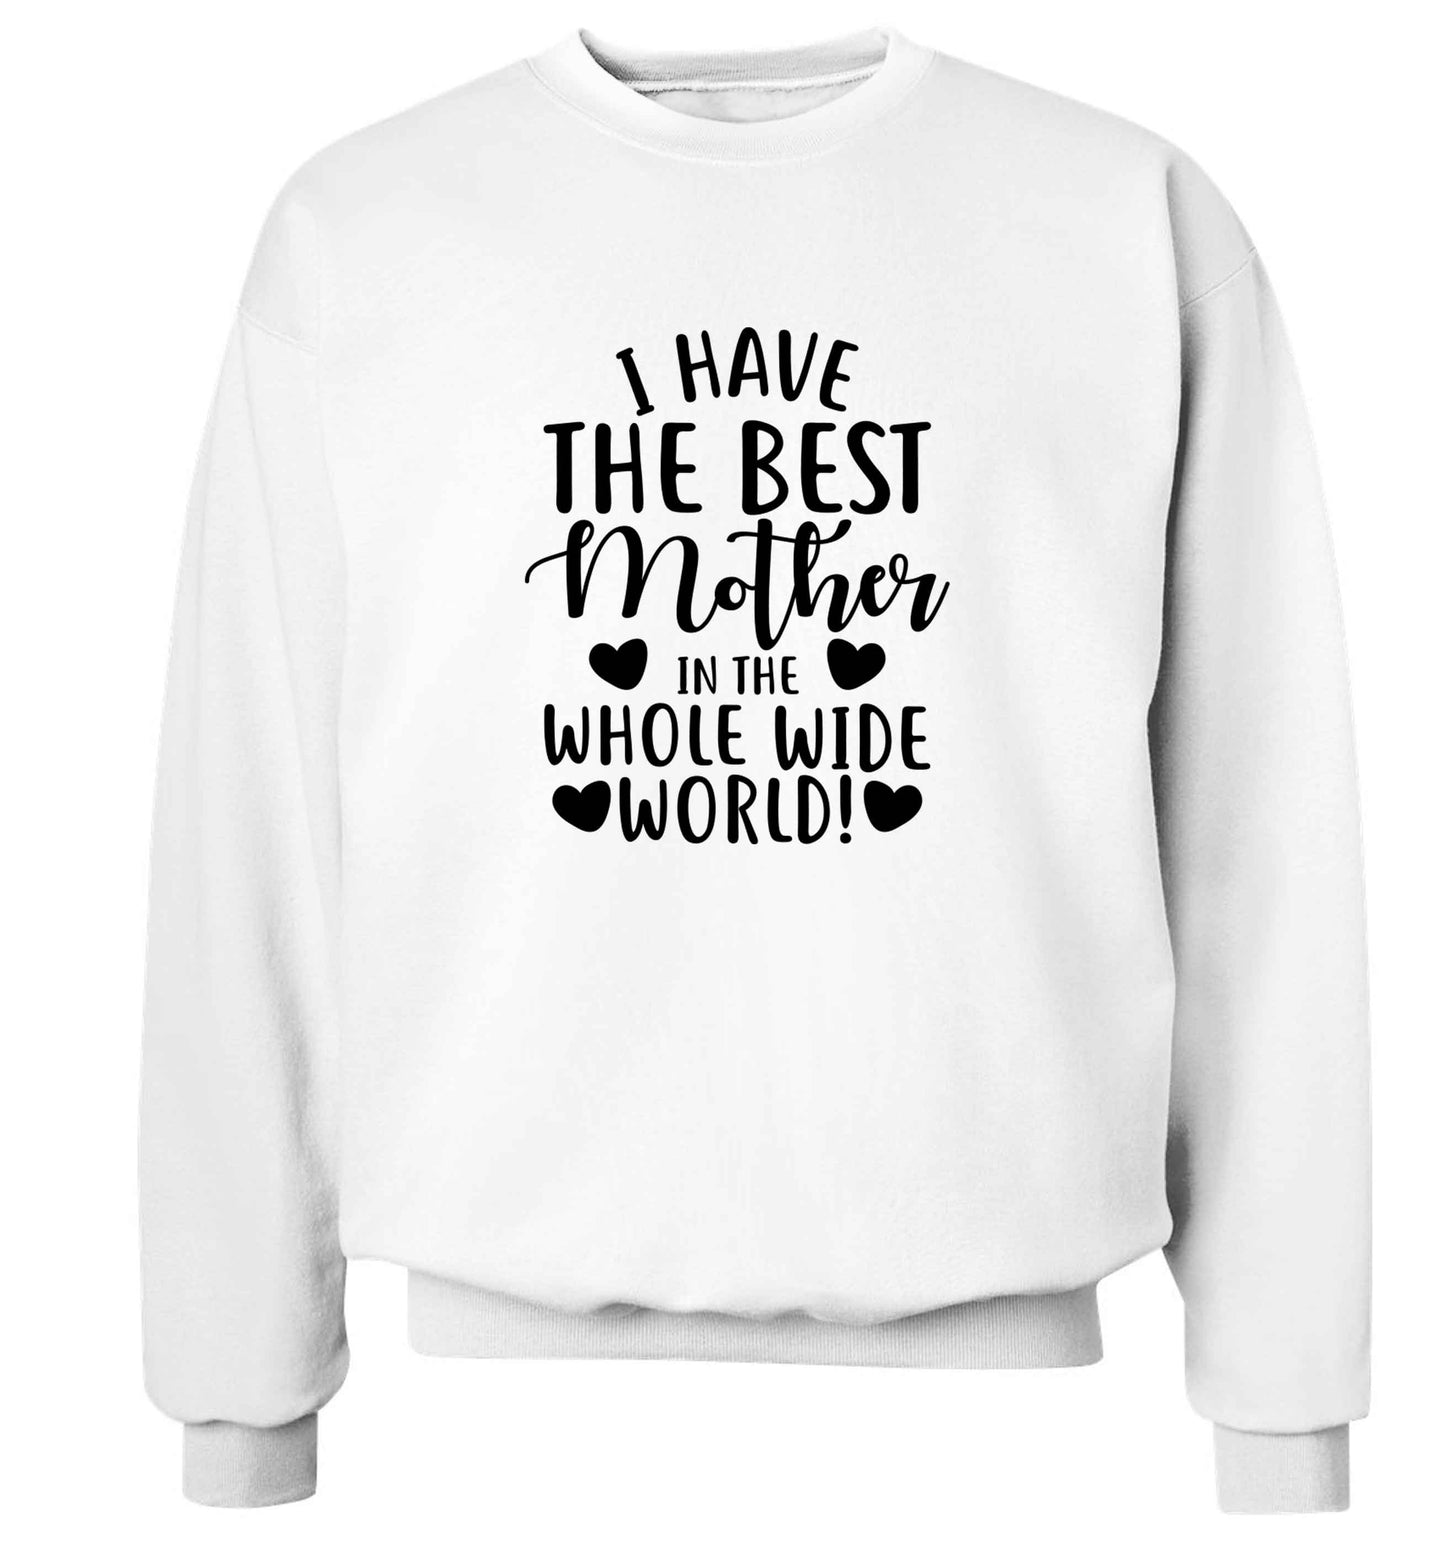 I have the best mother in the whole wide world adult's unisex white sweater 2XL